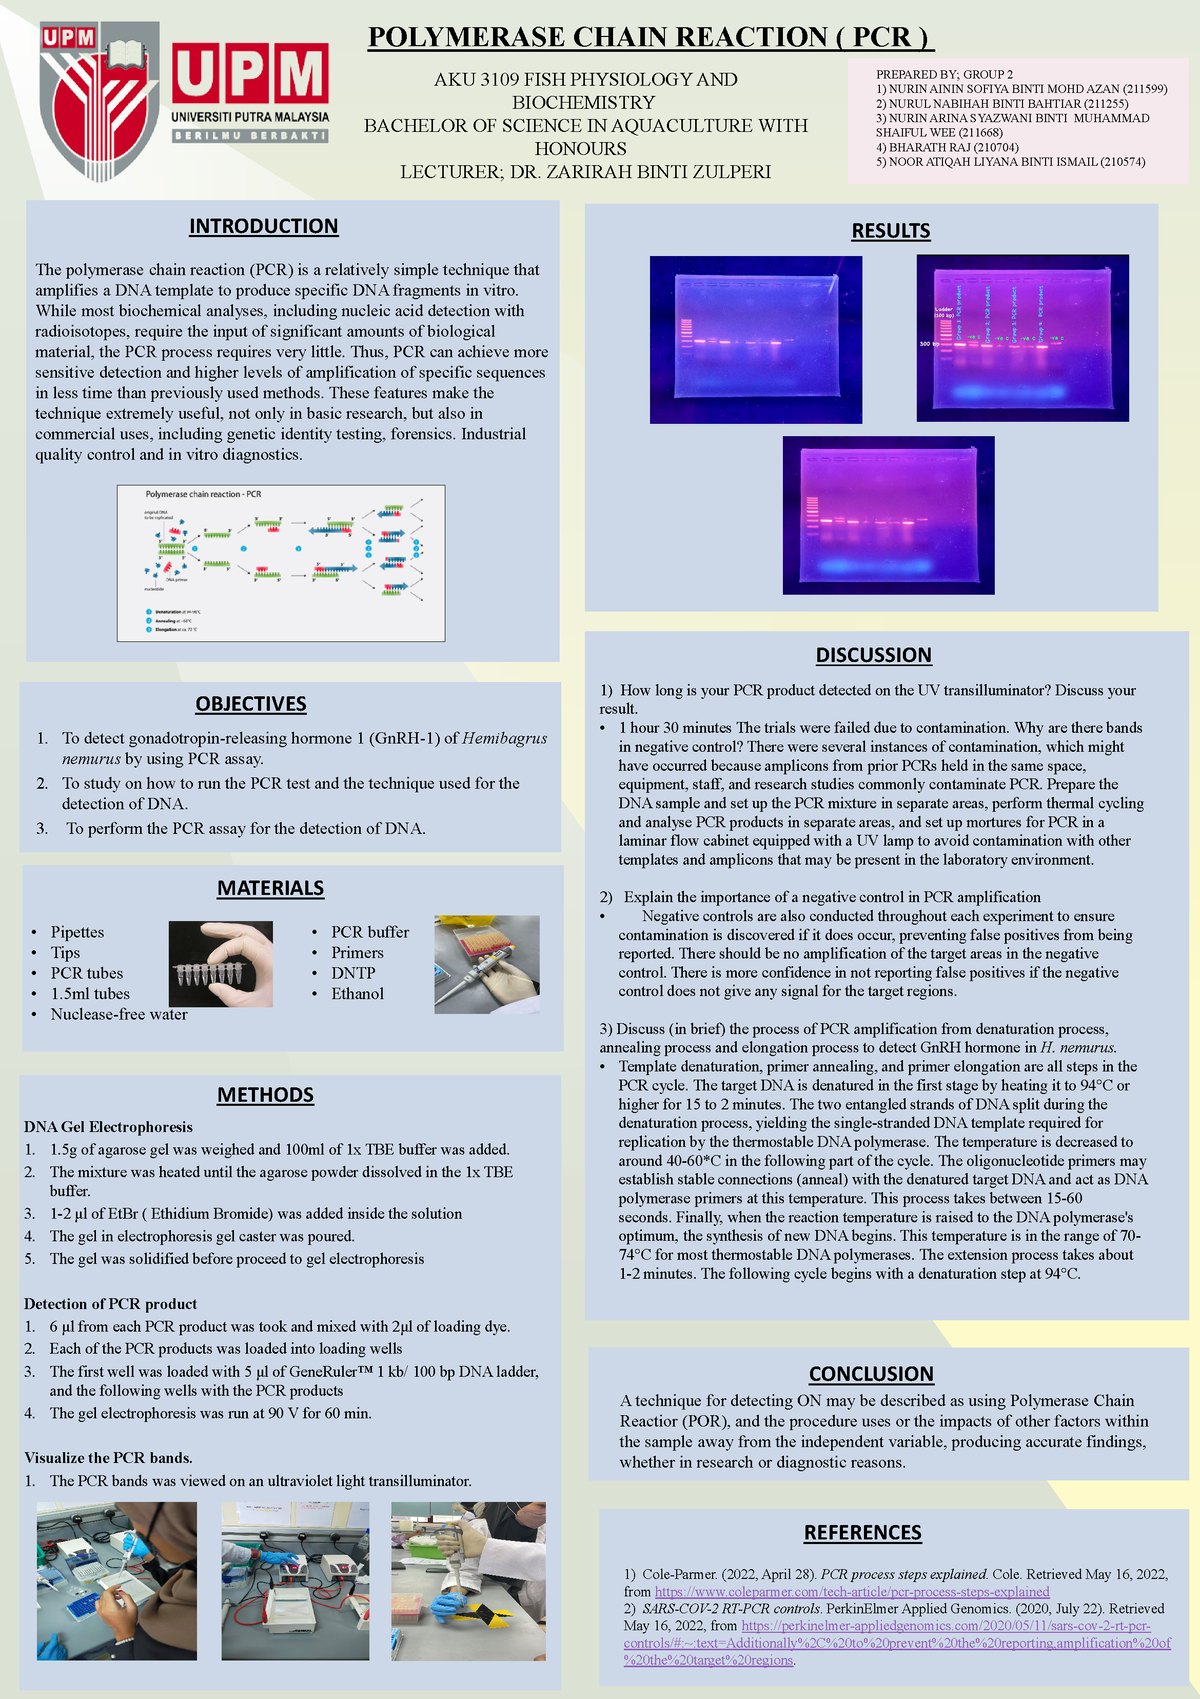 Poster Polymerase Chain Reaction - RESEARCH POSTER PRESENTATION DESIGN ...